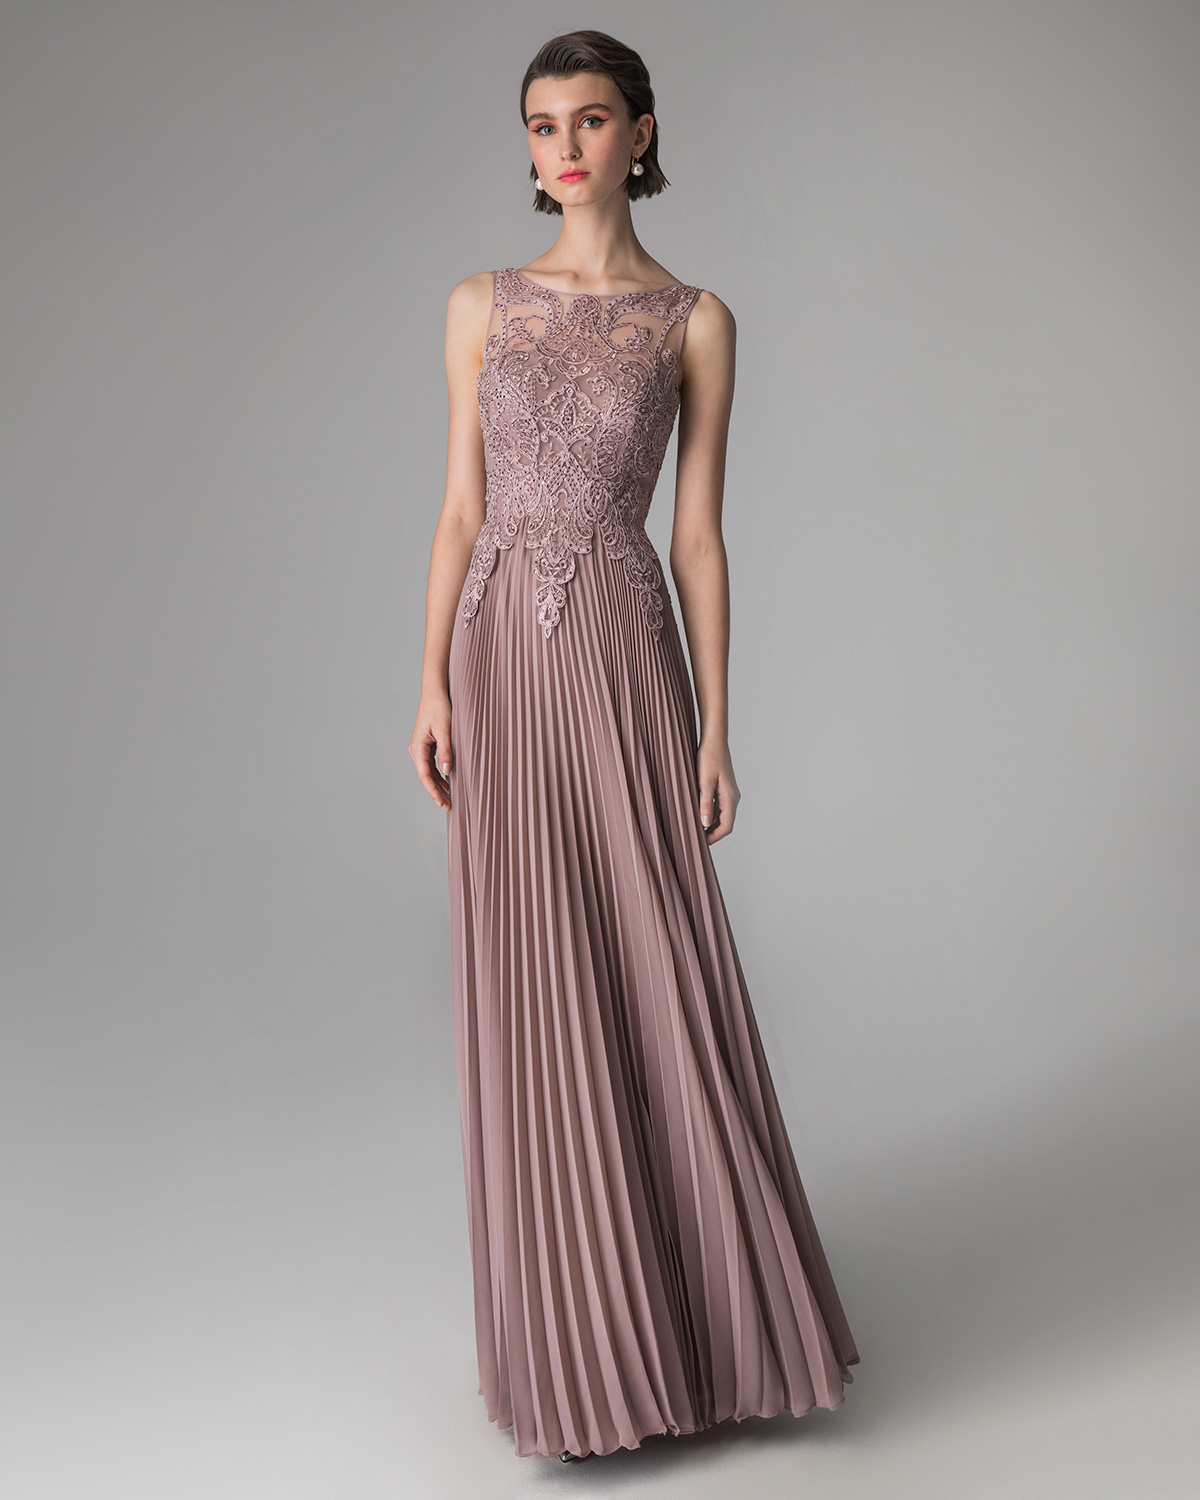 Classic Dresses / Long evening pleated dress with lace top and chiffon skirt